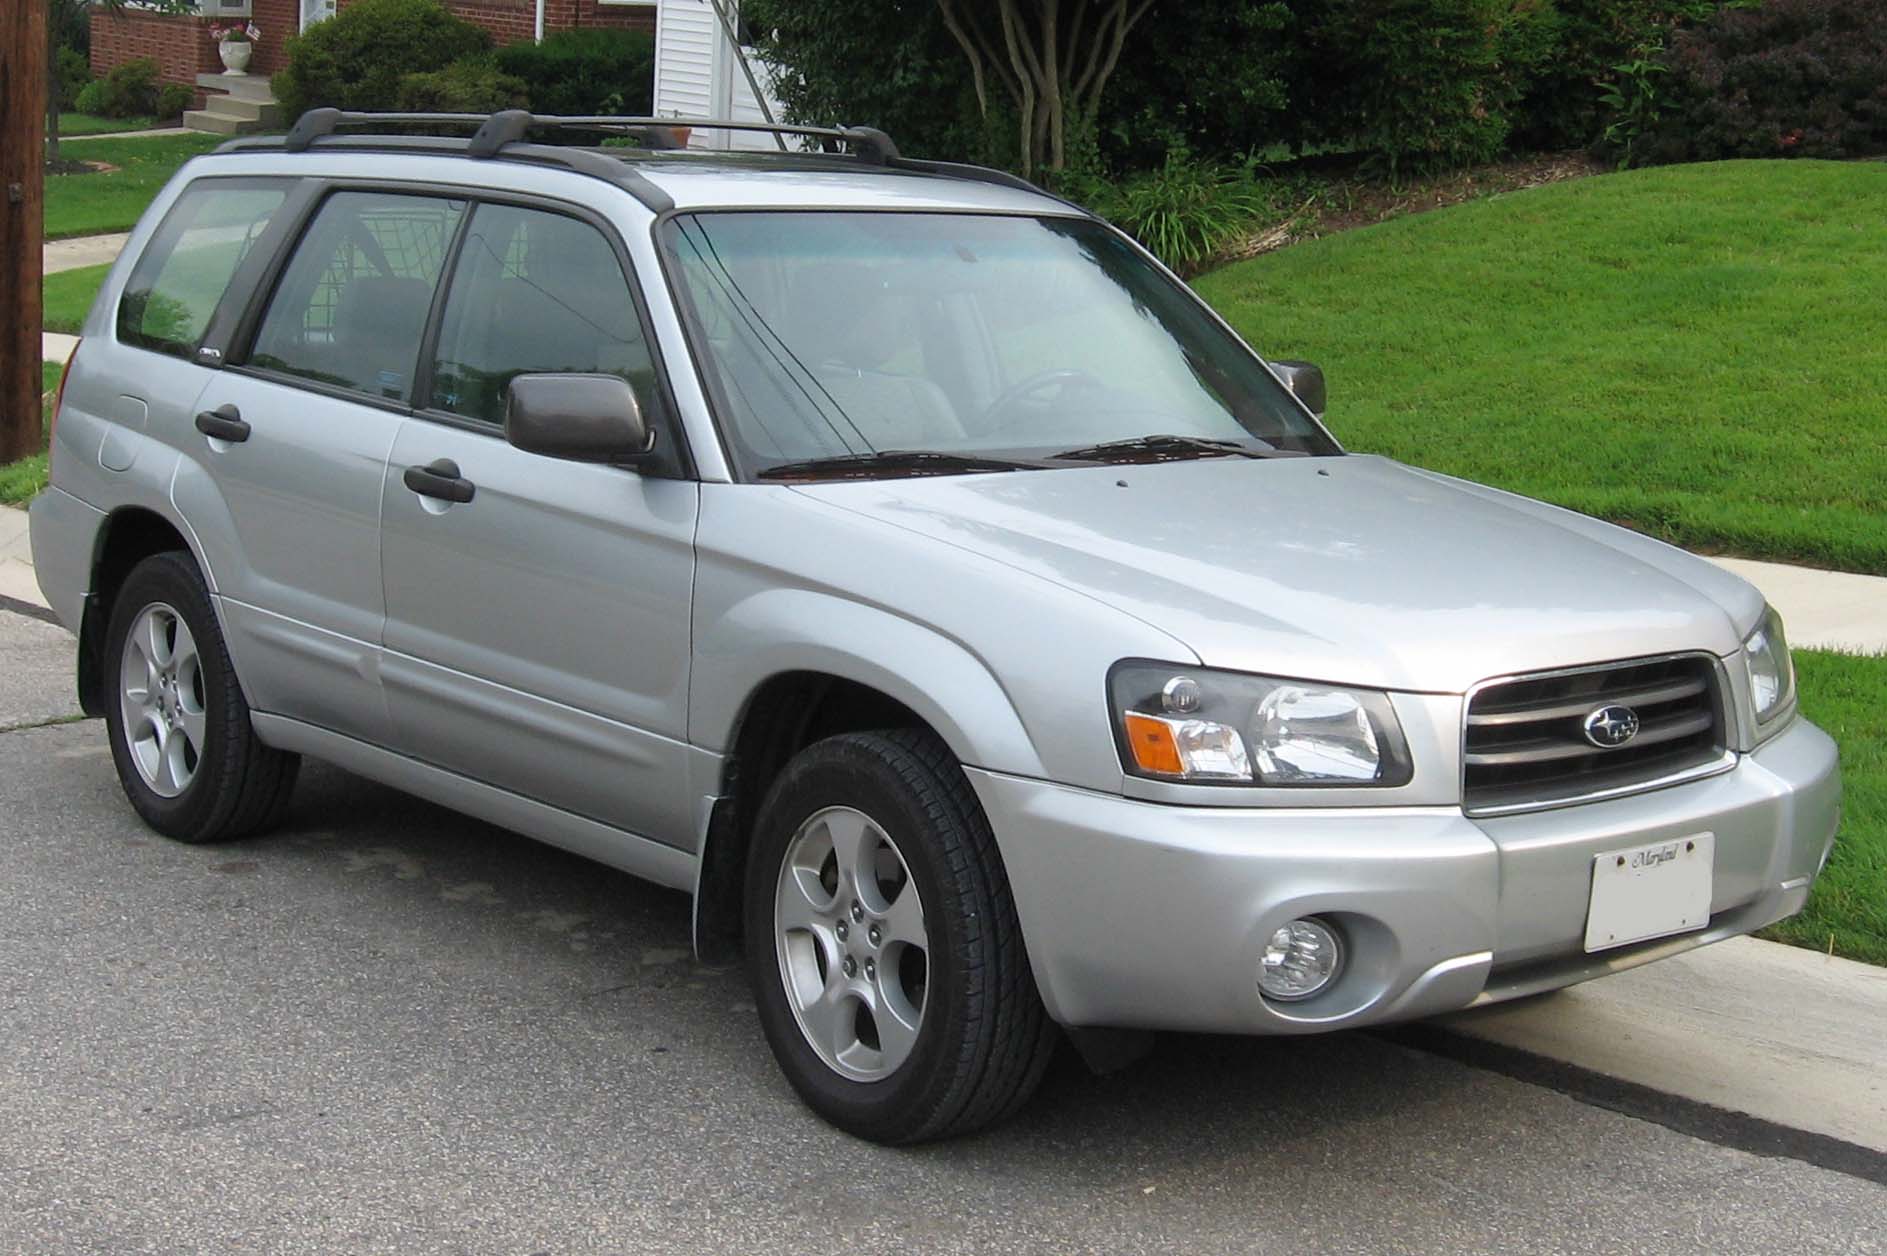 2005 Forester #12